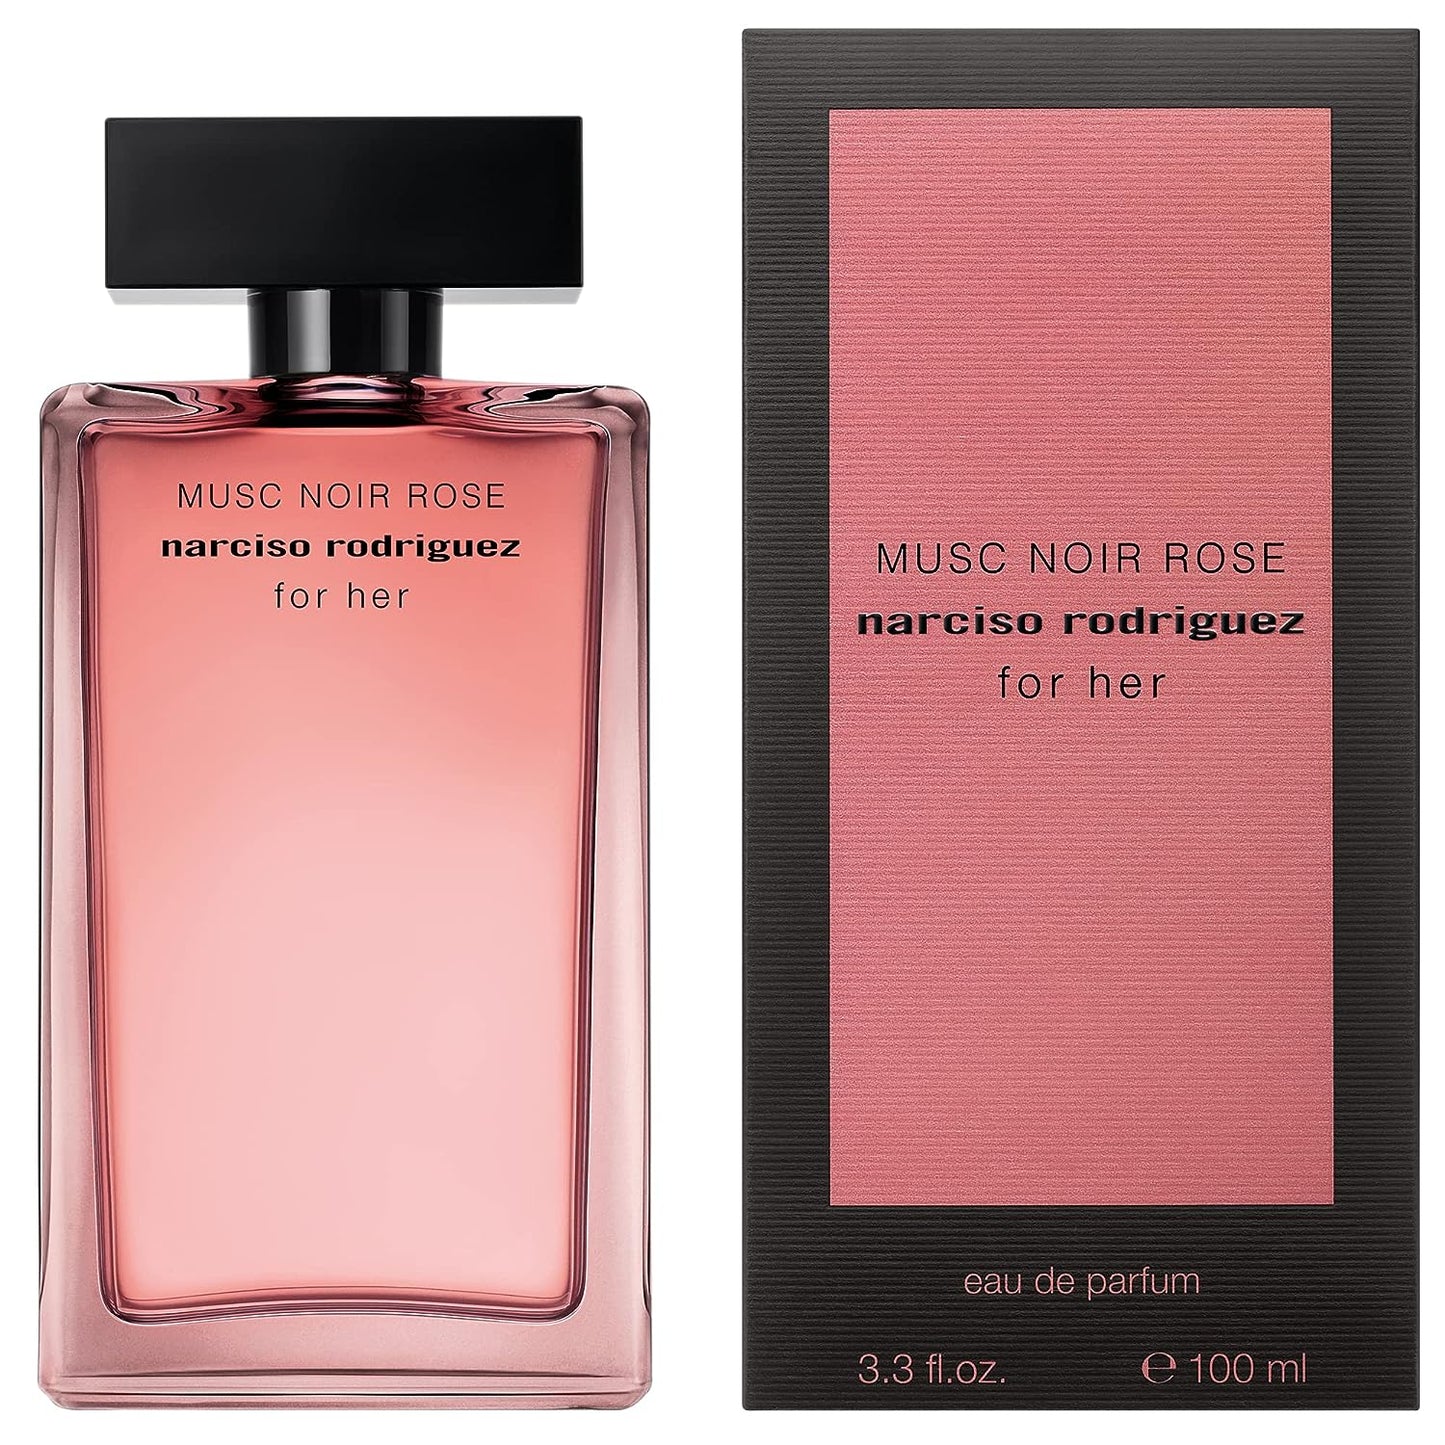 Narciso Rodriguez - Musc Noir Rose - For Her - EDP - 100ML